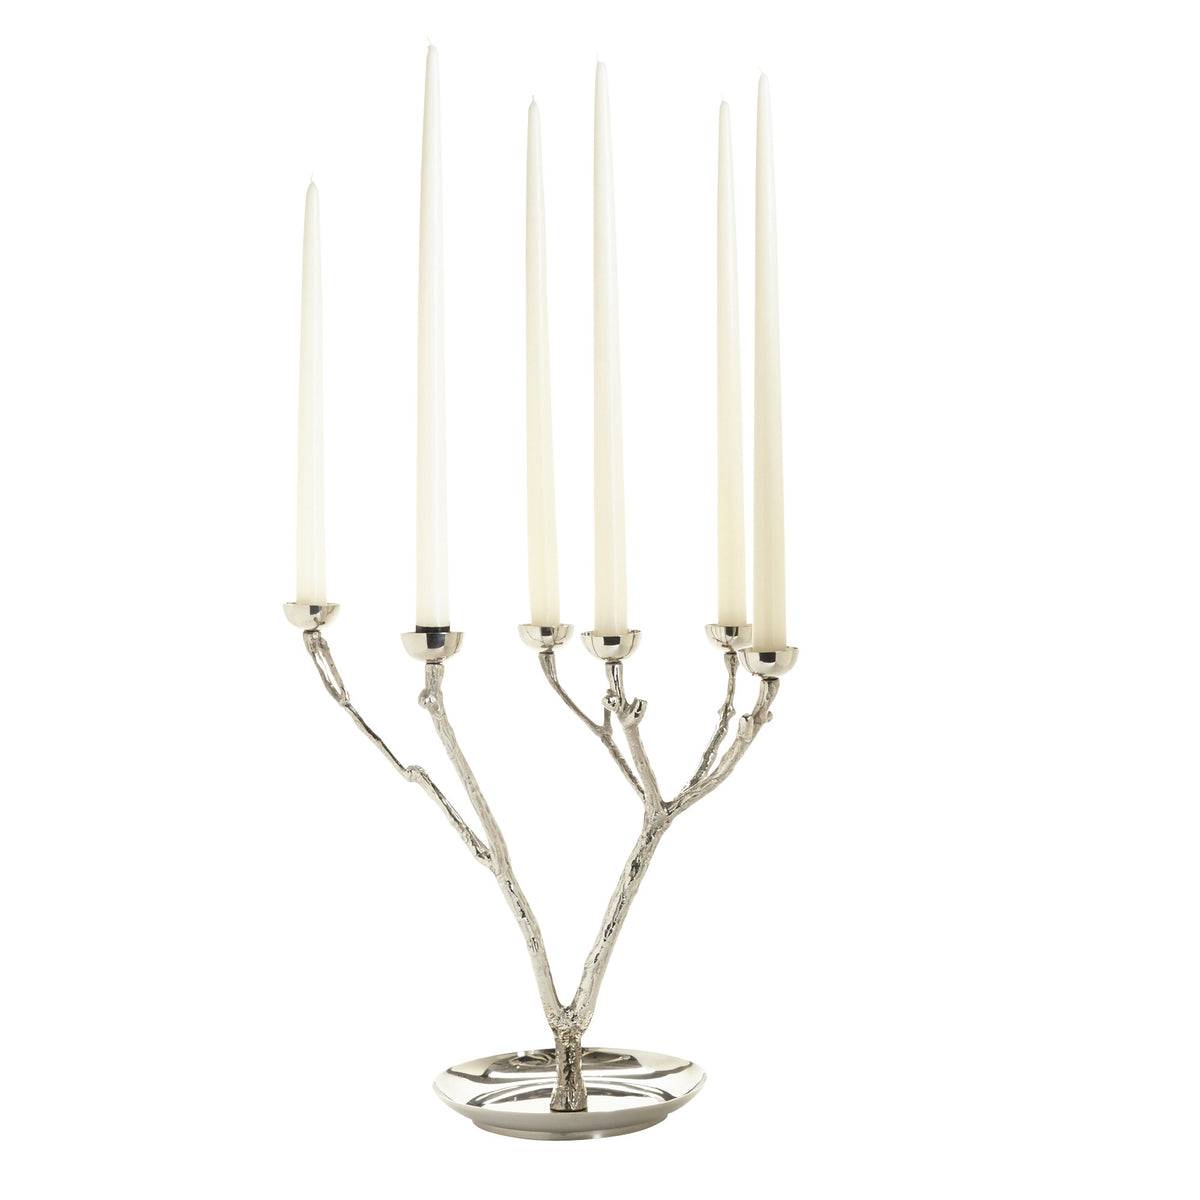 Twiggy Branch Candle Holder